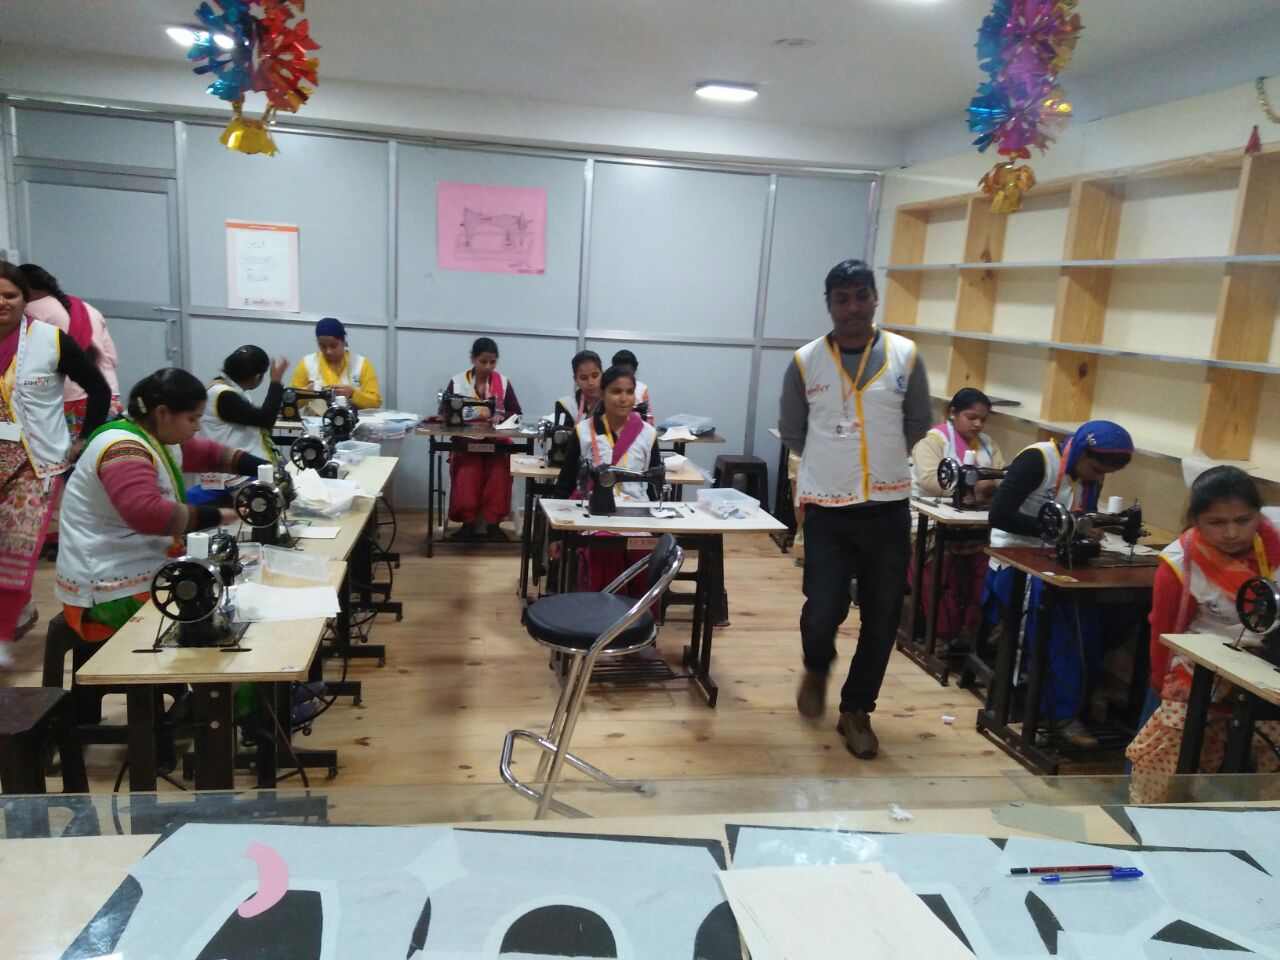 GIVES PMKVY INSTITUTE, Free tailoring courses in Mohali,Free tailoring course in Mohali,PMKVY centre in mohali,pmkvy courses in mohali